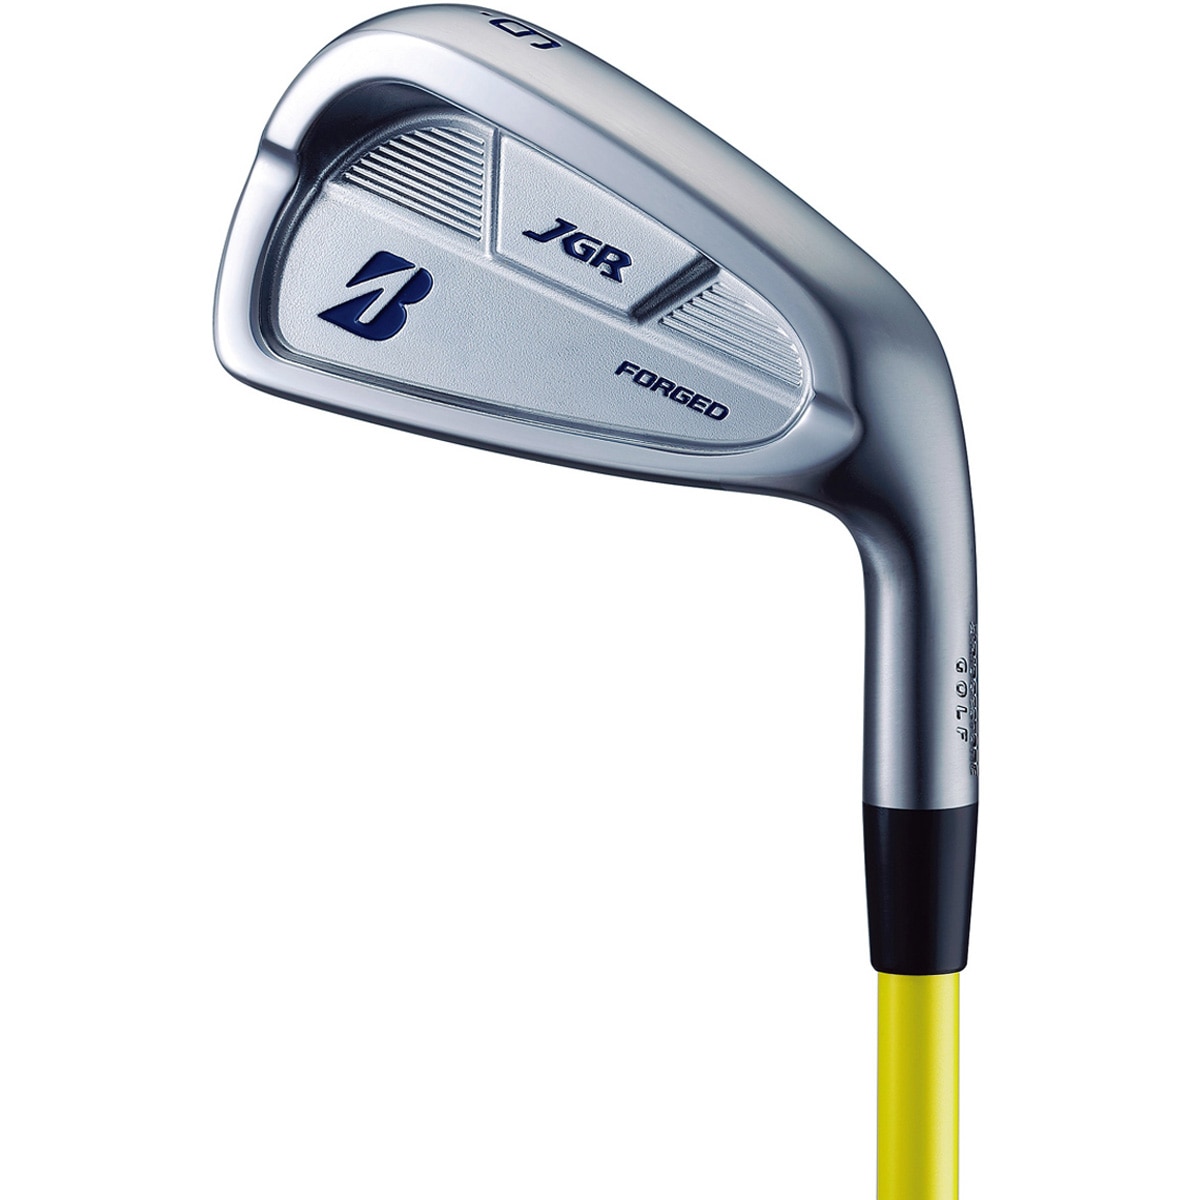 JGR FORGED ツアーAD J16-111 アイアンセット ブリヂストンTou - クラブ